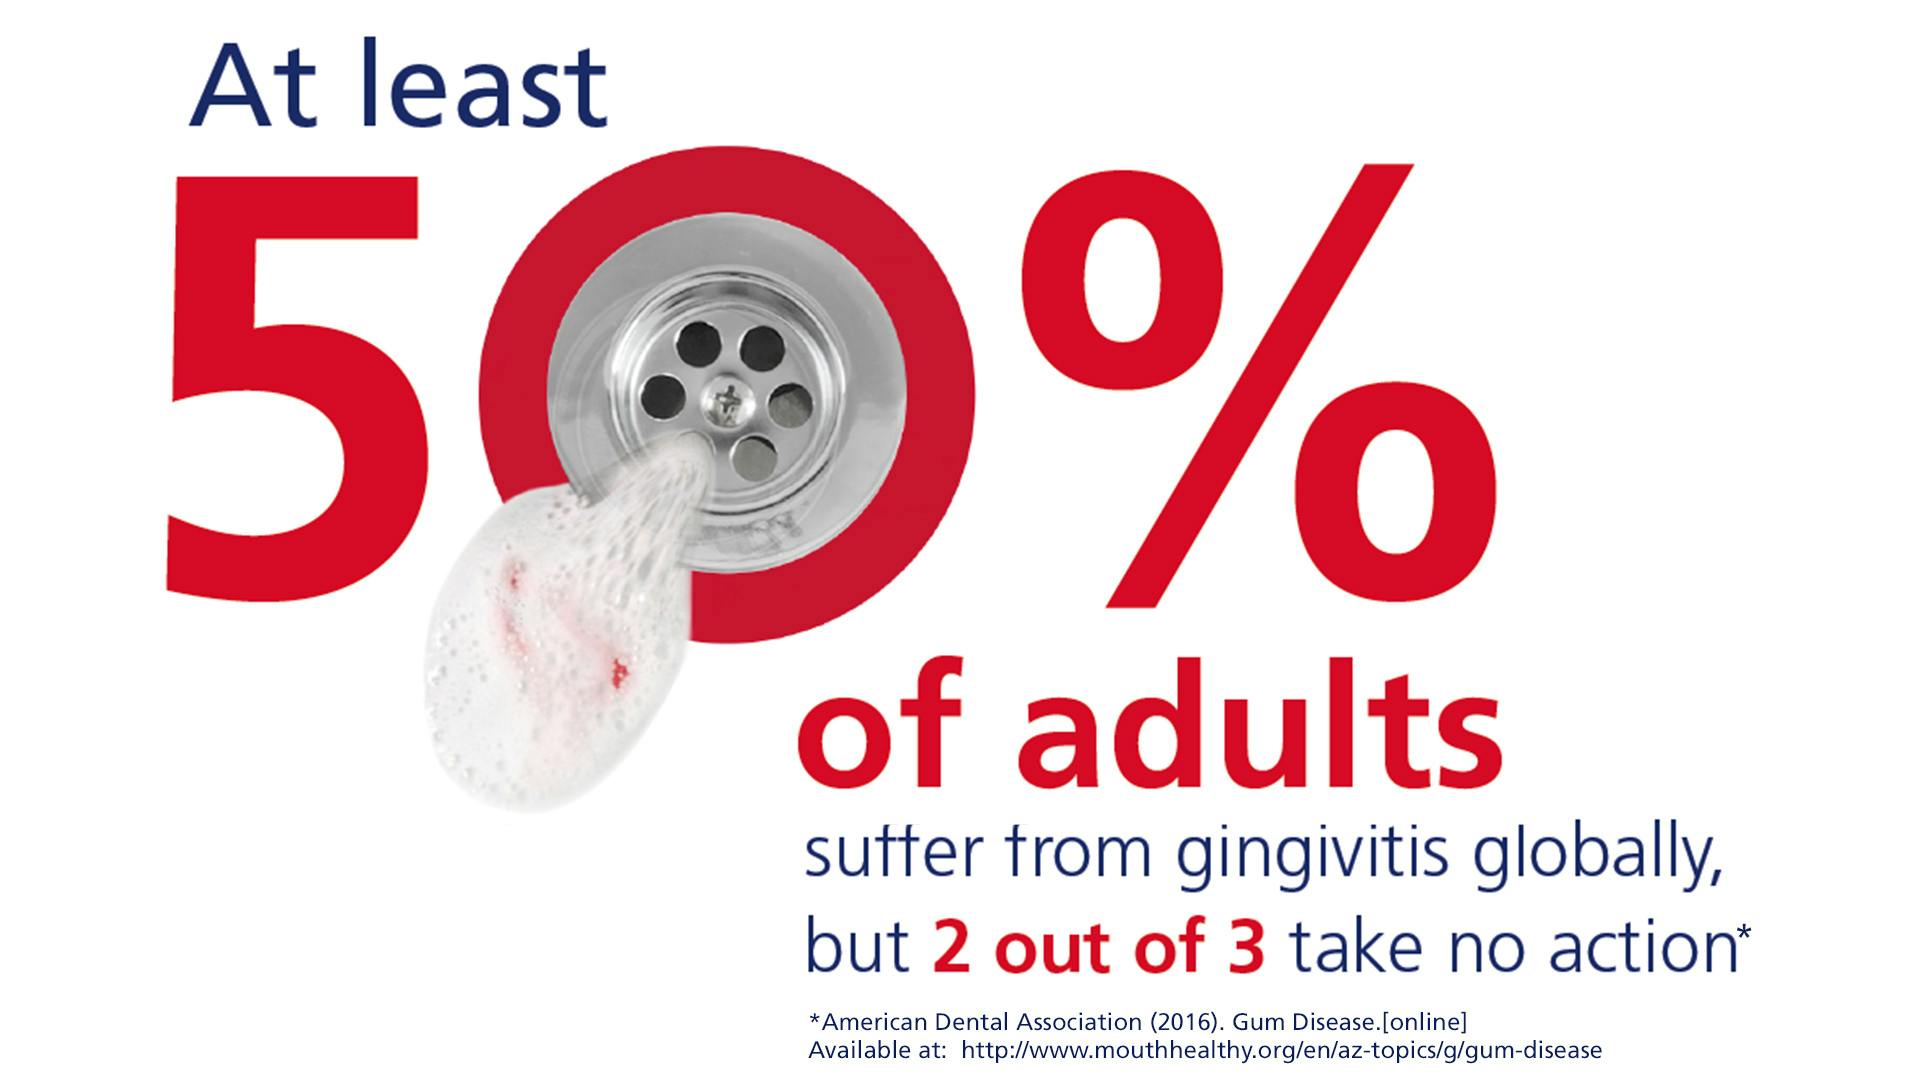 At least 50% of adults suffer from gingivitis globally, but 2 out of 3 take no action